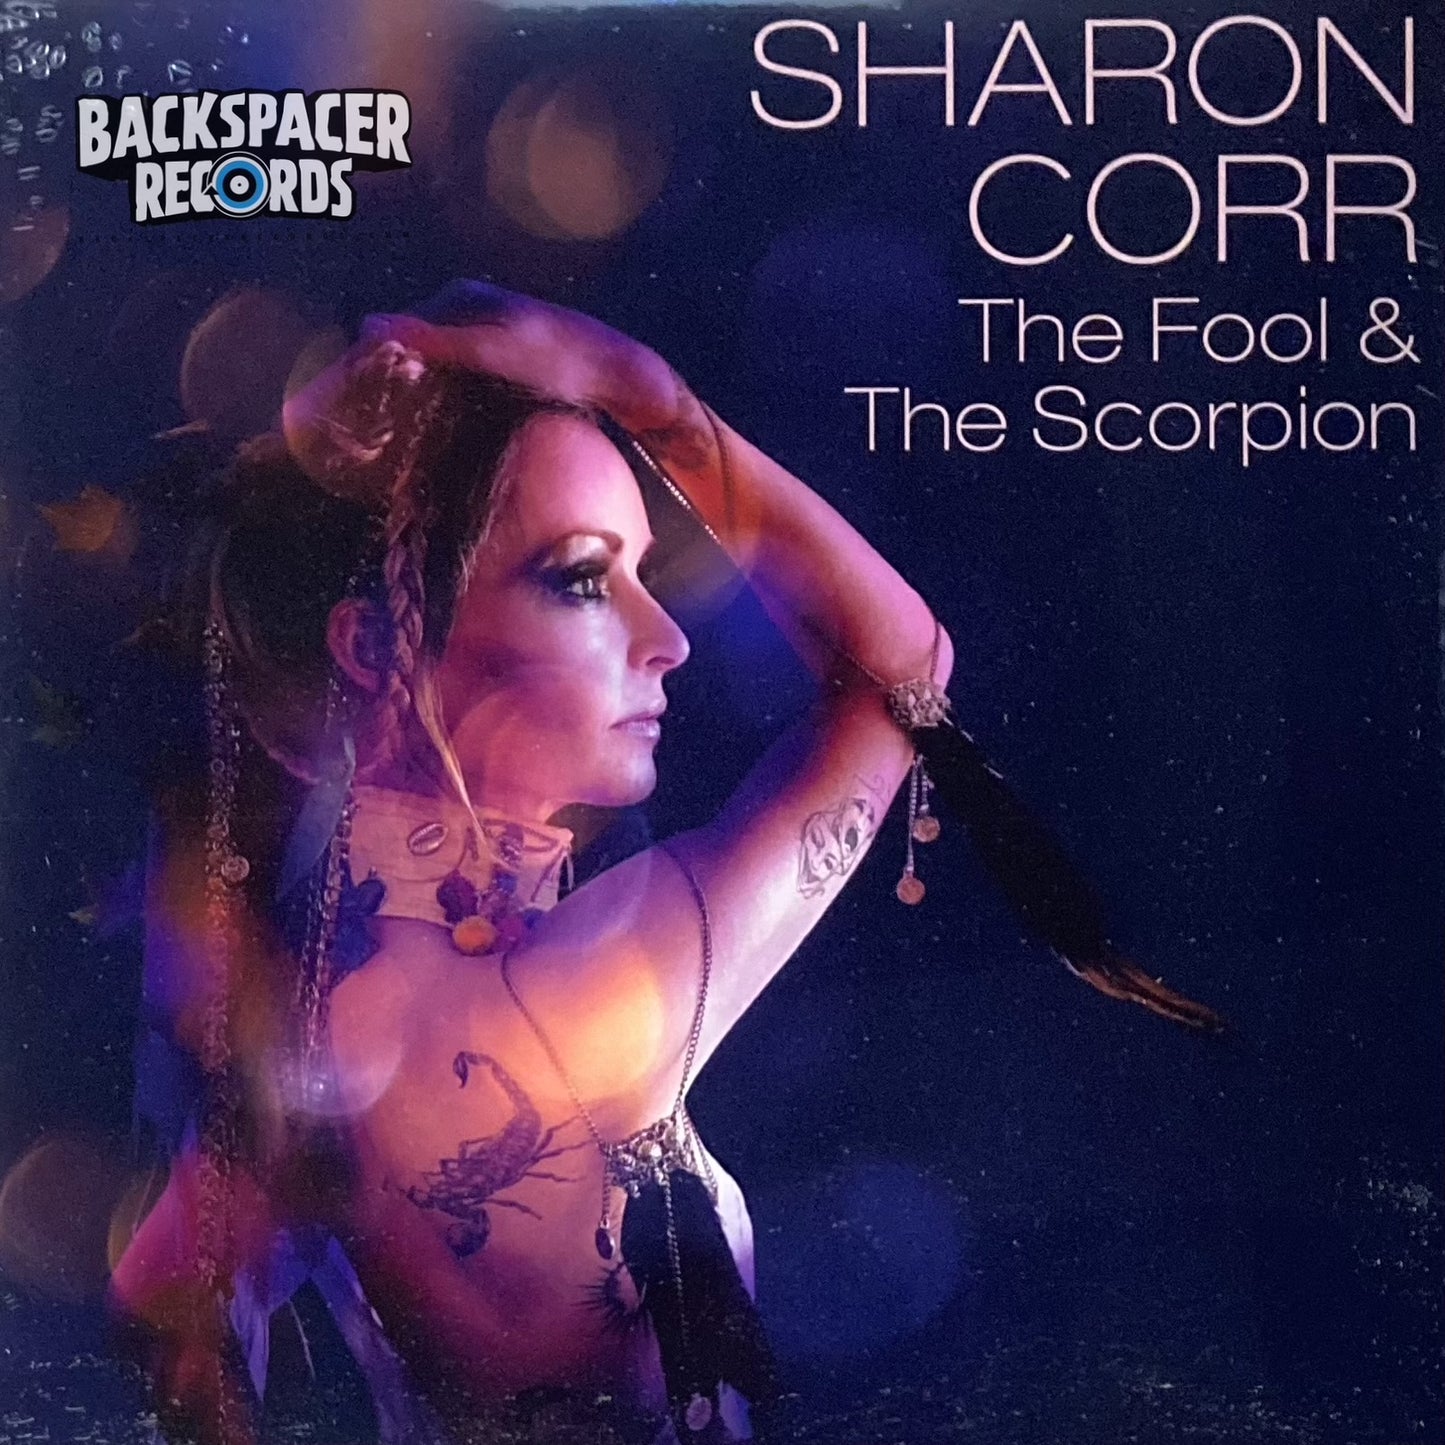 Sharon Corr – The Fool & The Scorpion (Limited Edition Signed) LP (Sealed)